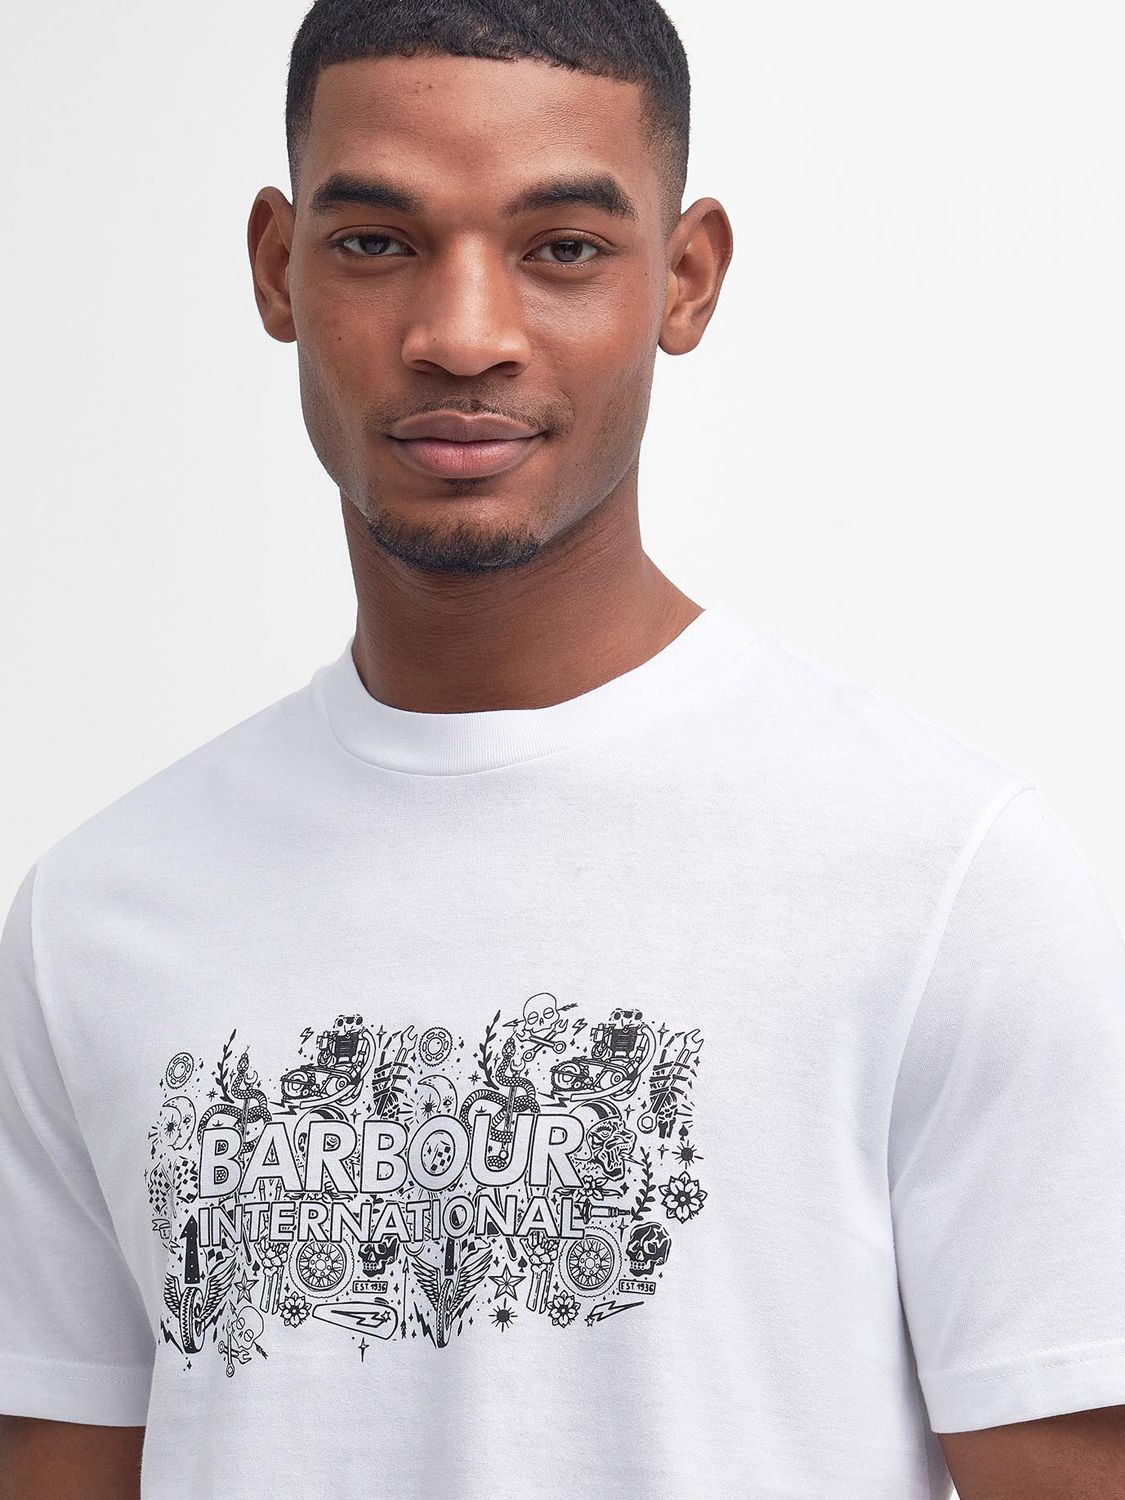 Barbour International Ridley Graphic T-Shirt, Bright White, S